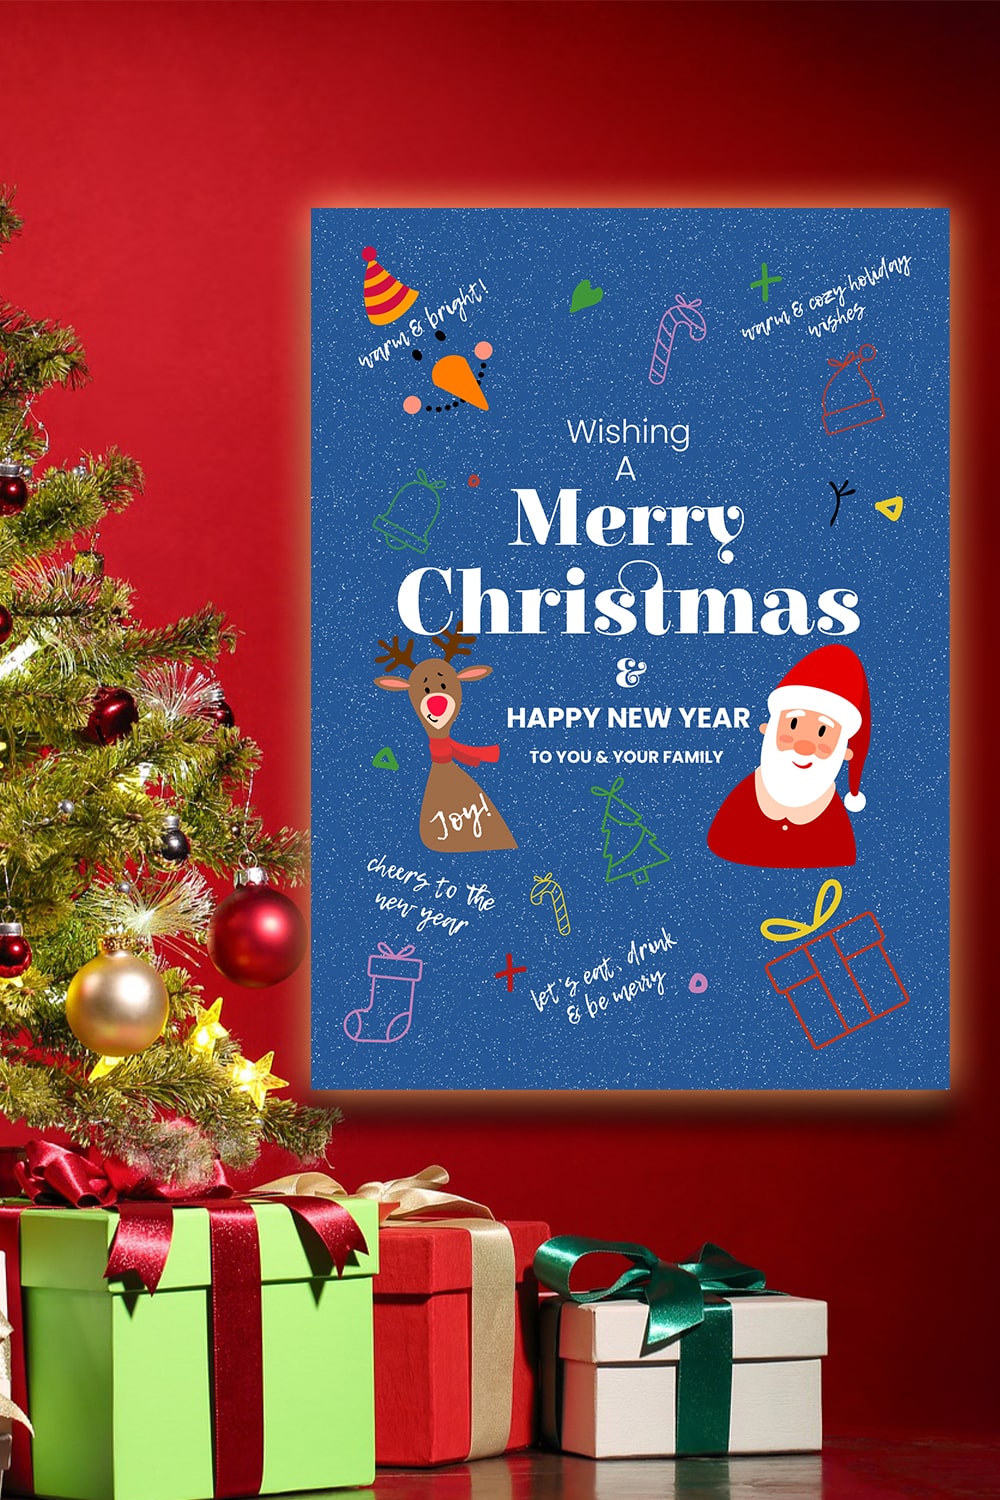 Printable Christmas and New Year Cards PSD pinterest image.